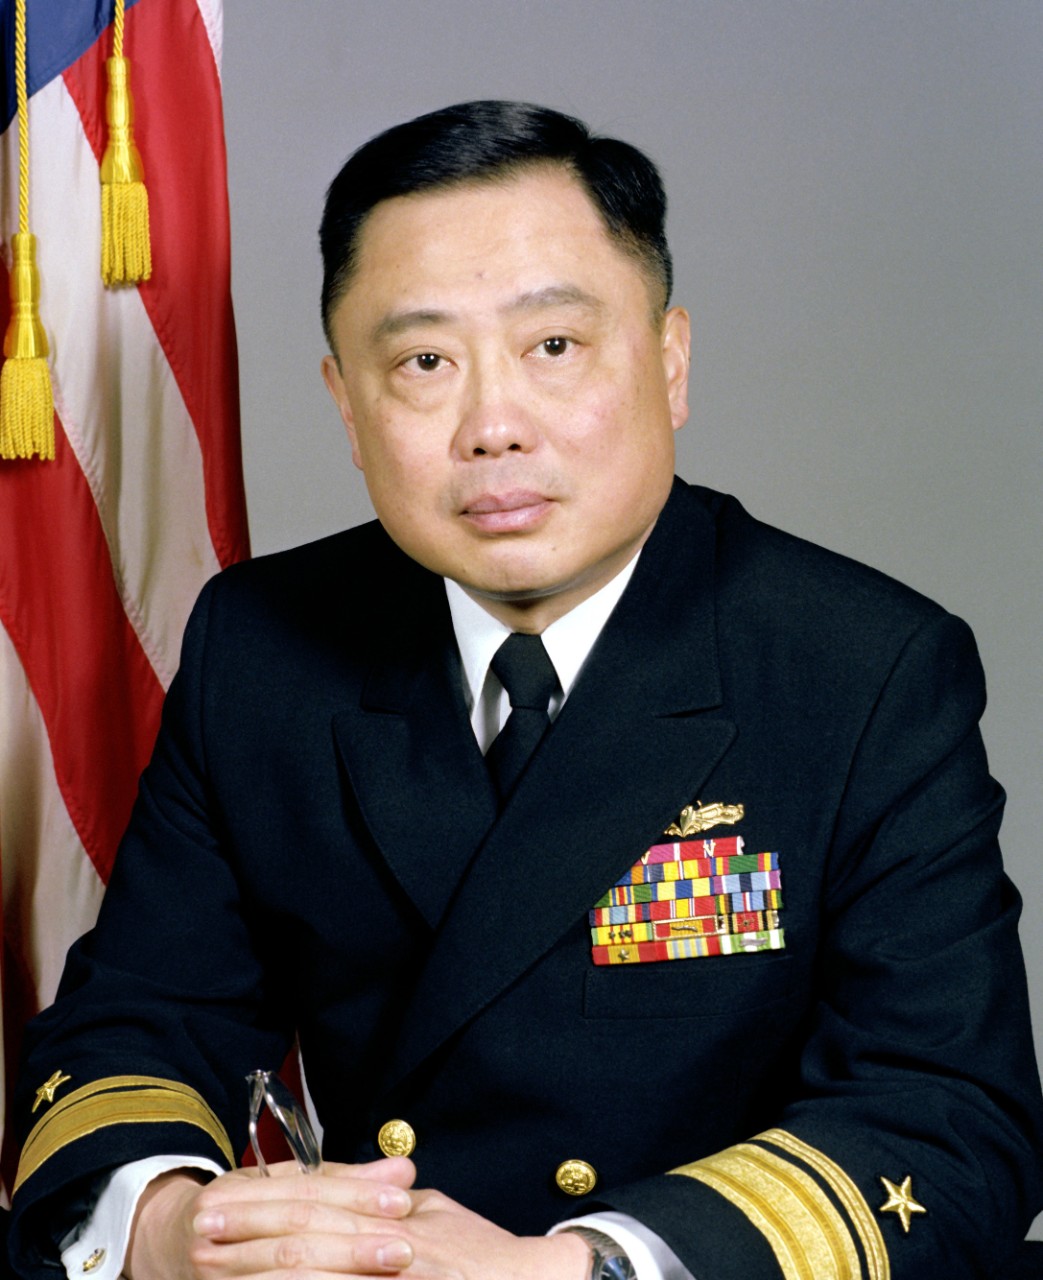 330-CFD-DN-SC-83-03635:  Rear Admiral Ming Chang, 1983.  Rear Admiral Chang is believed to be the first foreign-born, naturalized American to command a U.S. warship. In 1980, he was the first naturalized Asian-American to be promoted to flag rank. Chang served for thirty-four years in the U.S. Navy before retiring in his post as Inspector General of the Navy during his last tour in the early 1990s. Photographed by PH2 Dunigan.   Official U.S. Navy photograph, now in the collections of the National Archives.   